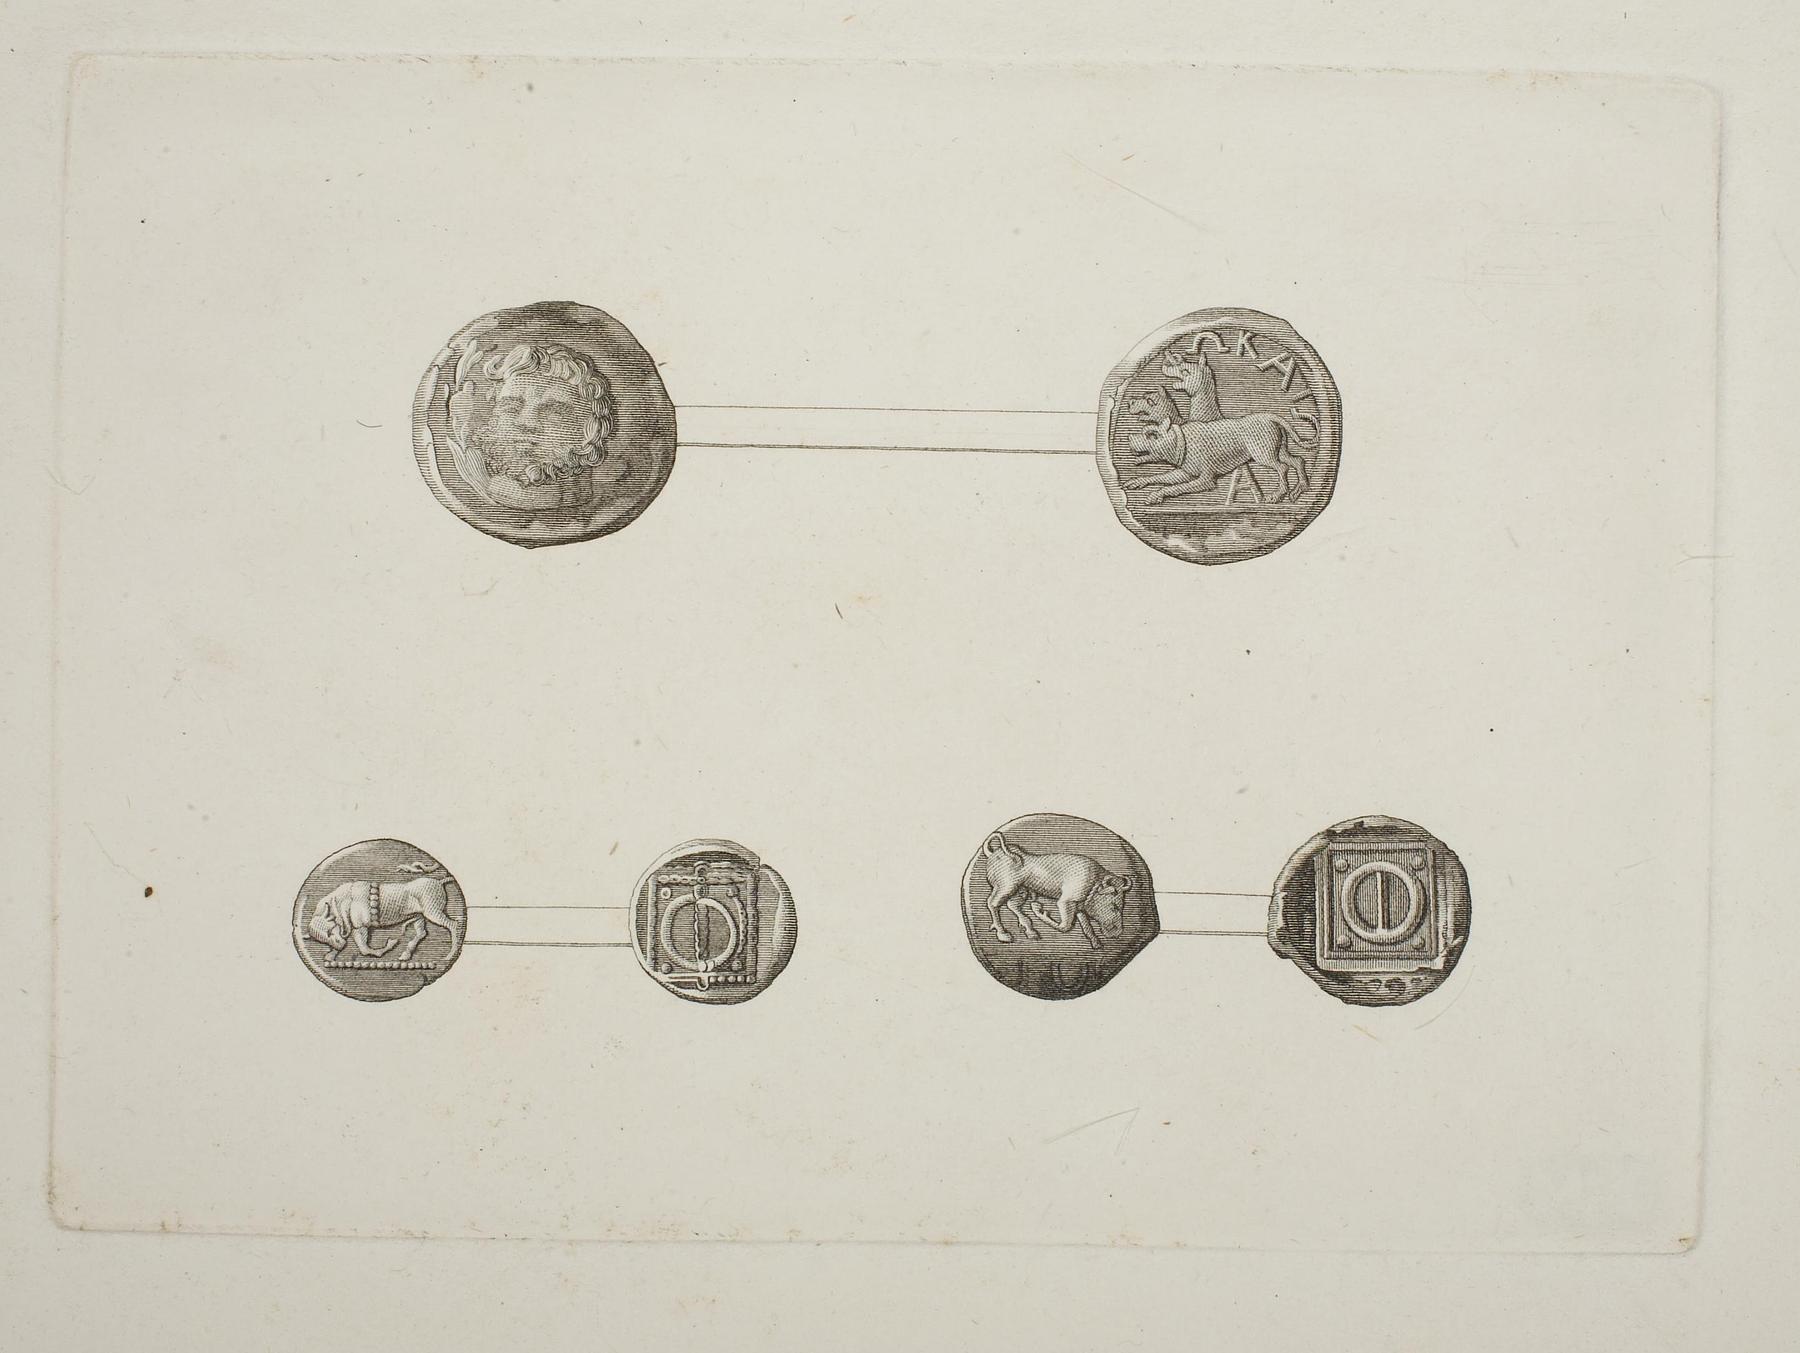 Greek coins obverse and reverse, E1566